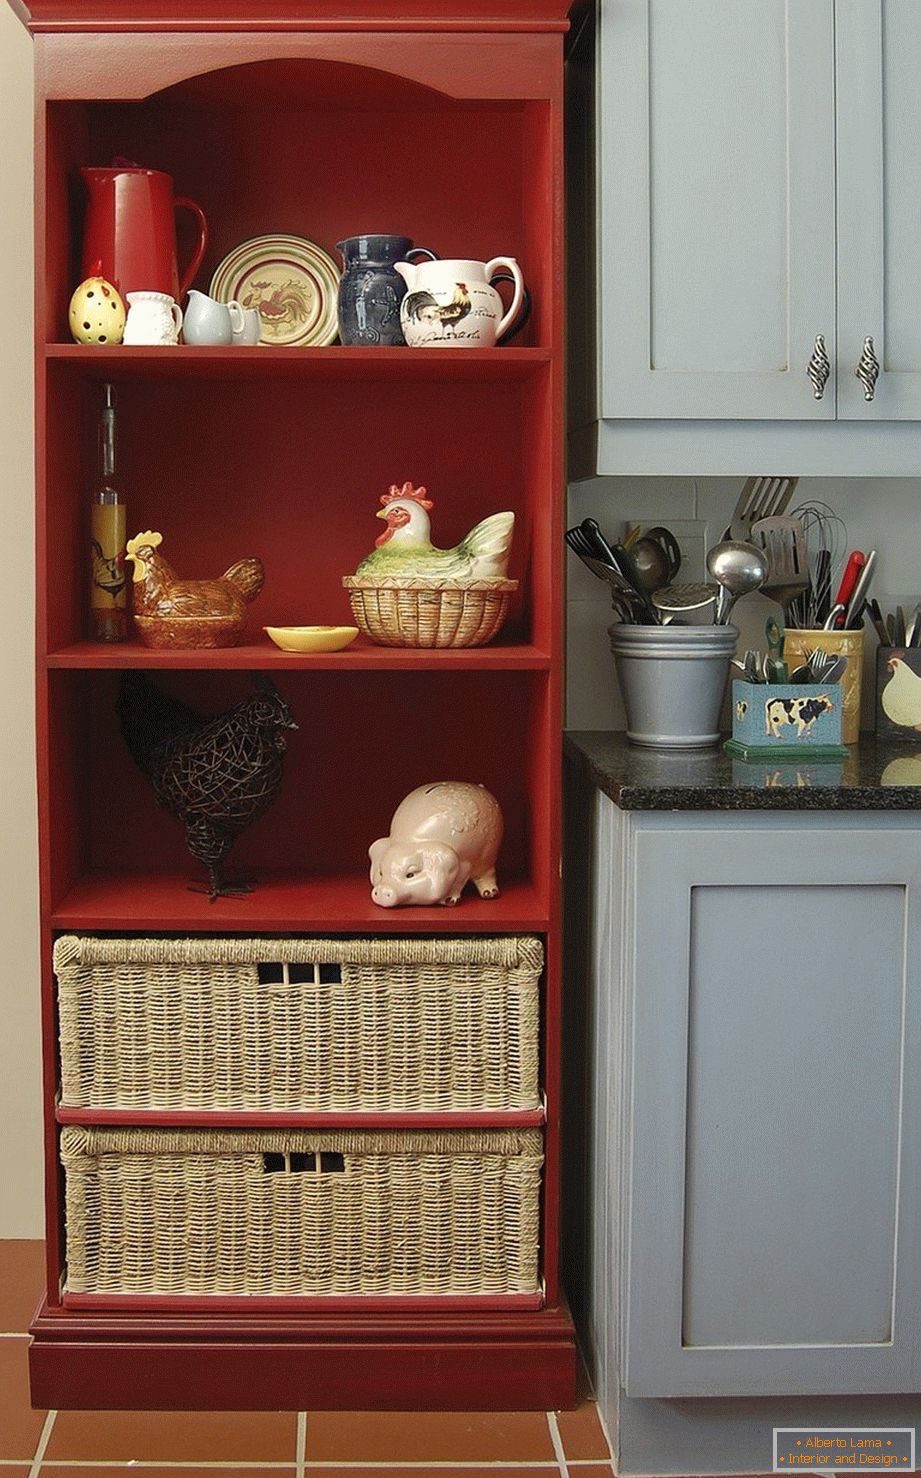 Shelves for storing dishes and accessories